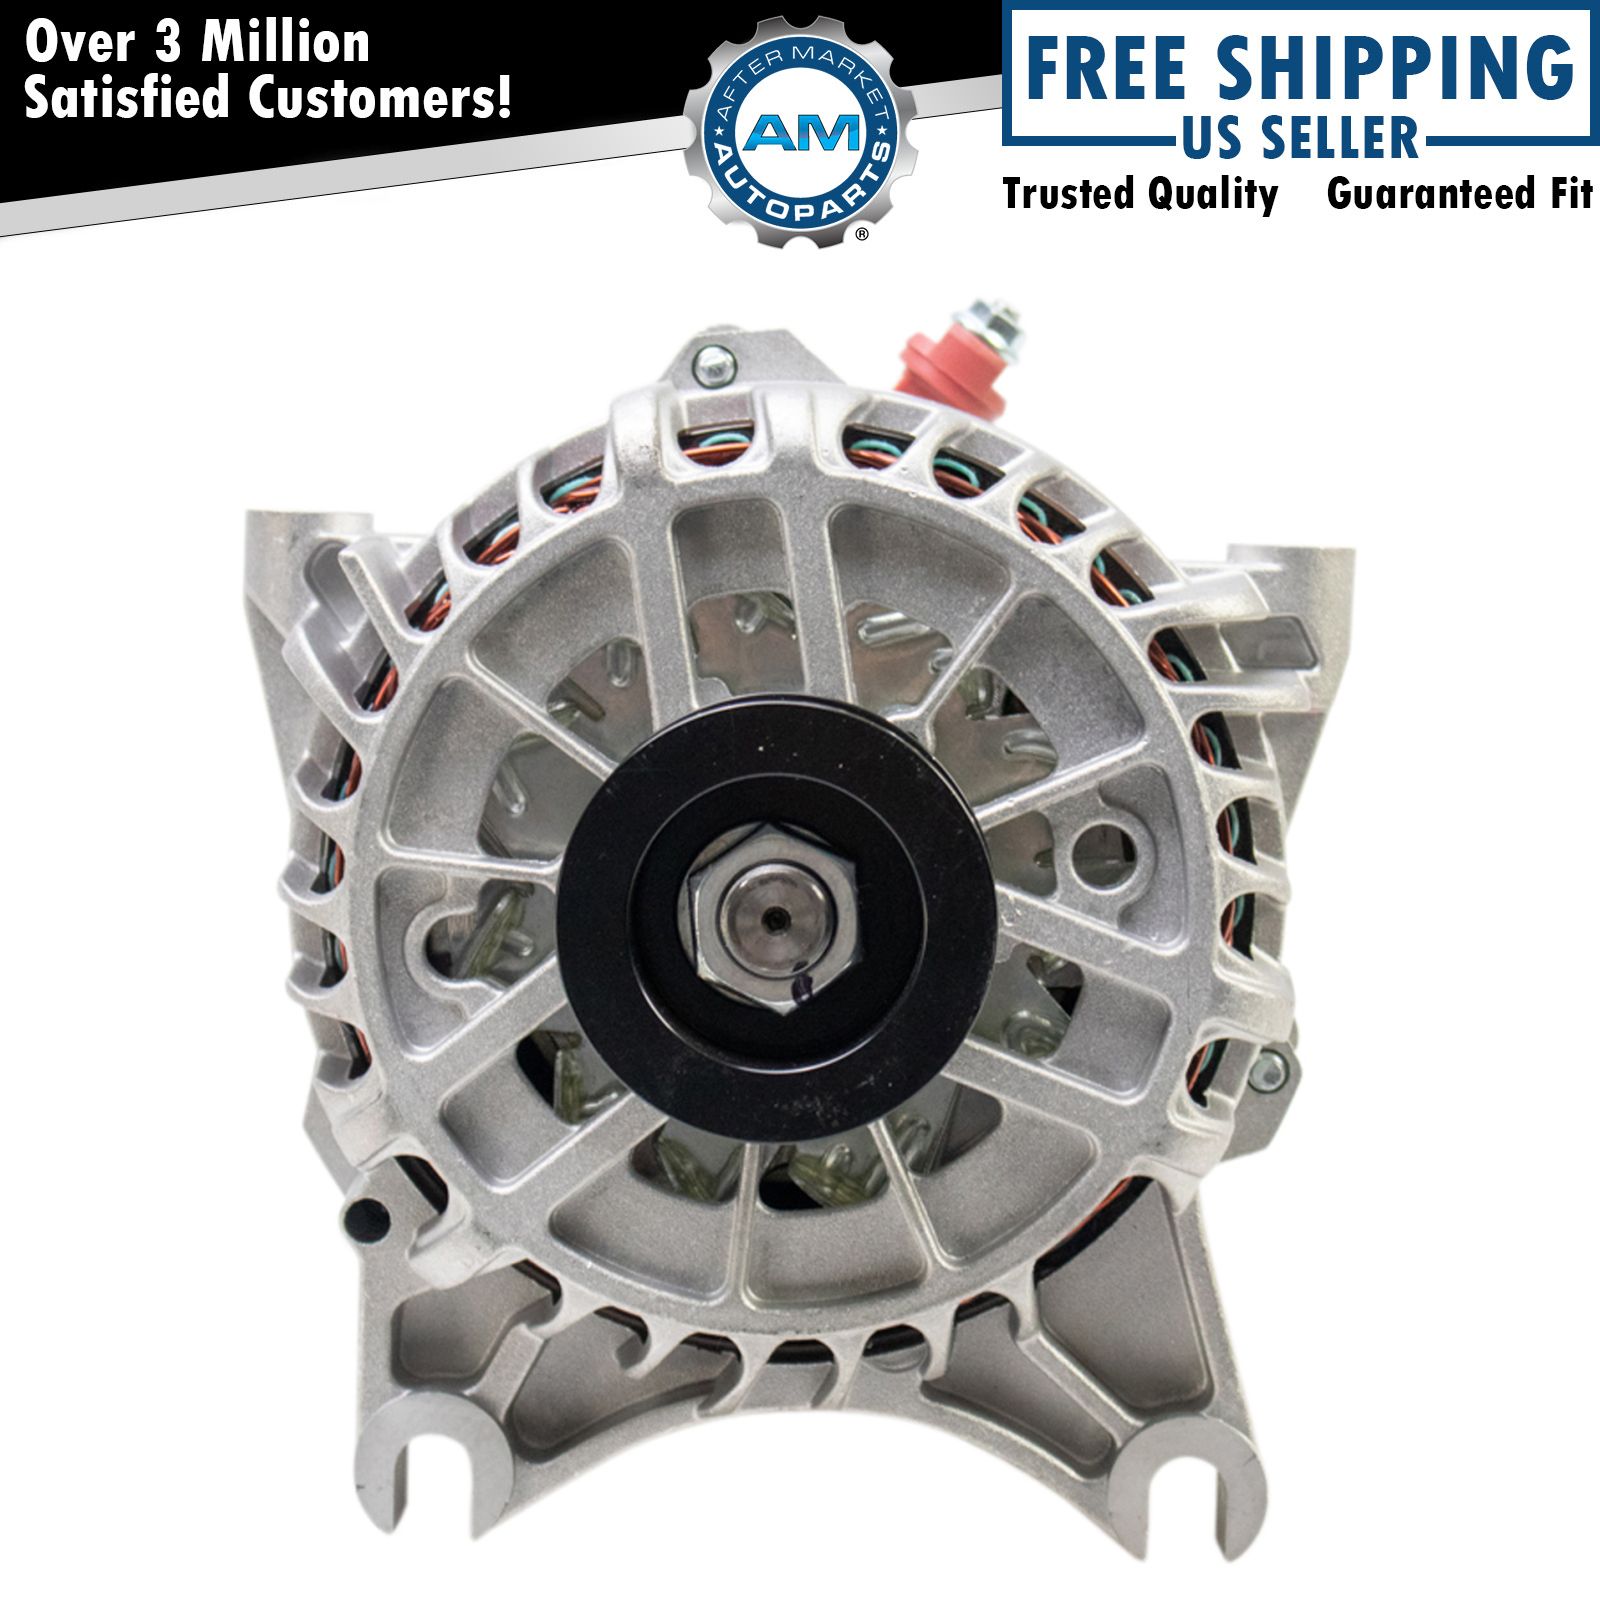 New Alternator for Crown Vic Grand Marquis Town Car Police or Limo Package